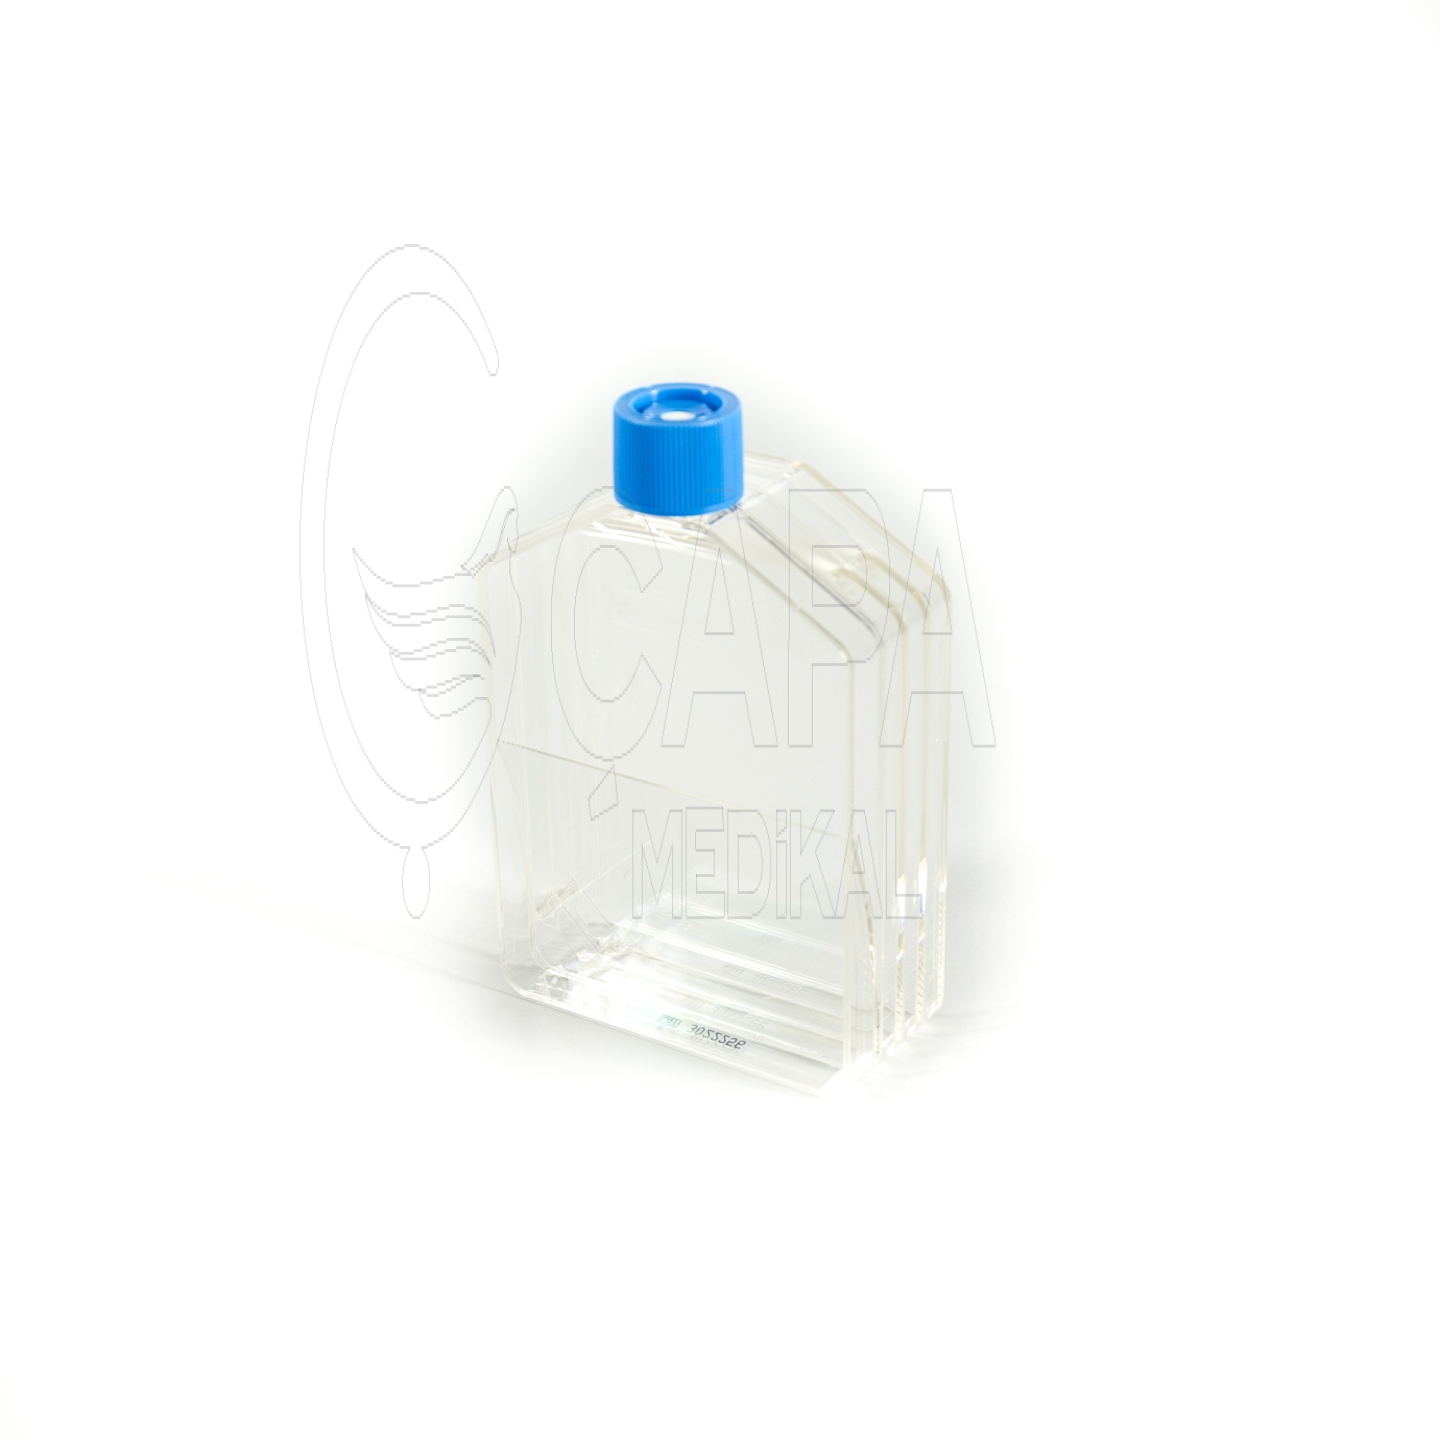 CELL CULTURE FLASK 175 CM2 (750 ML)